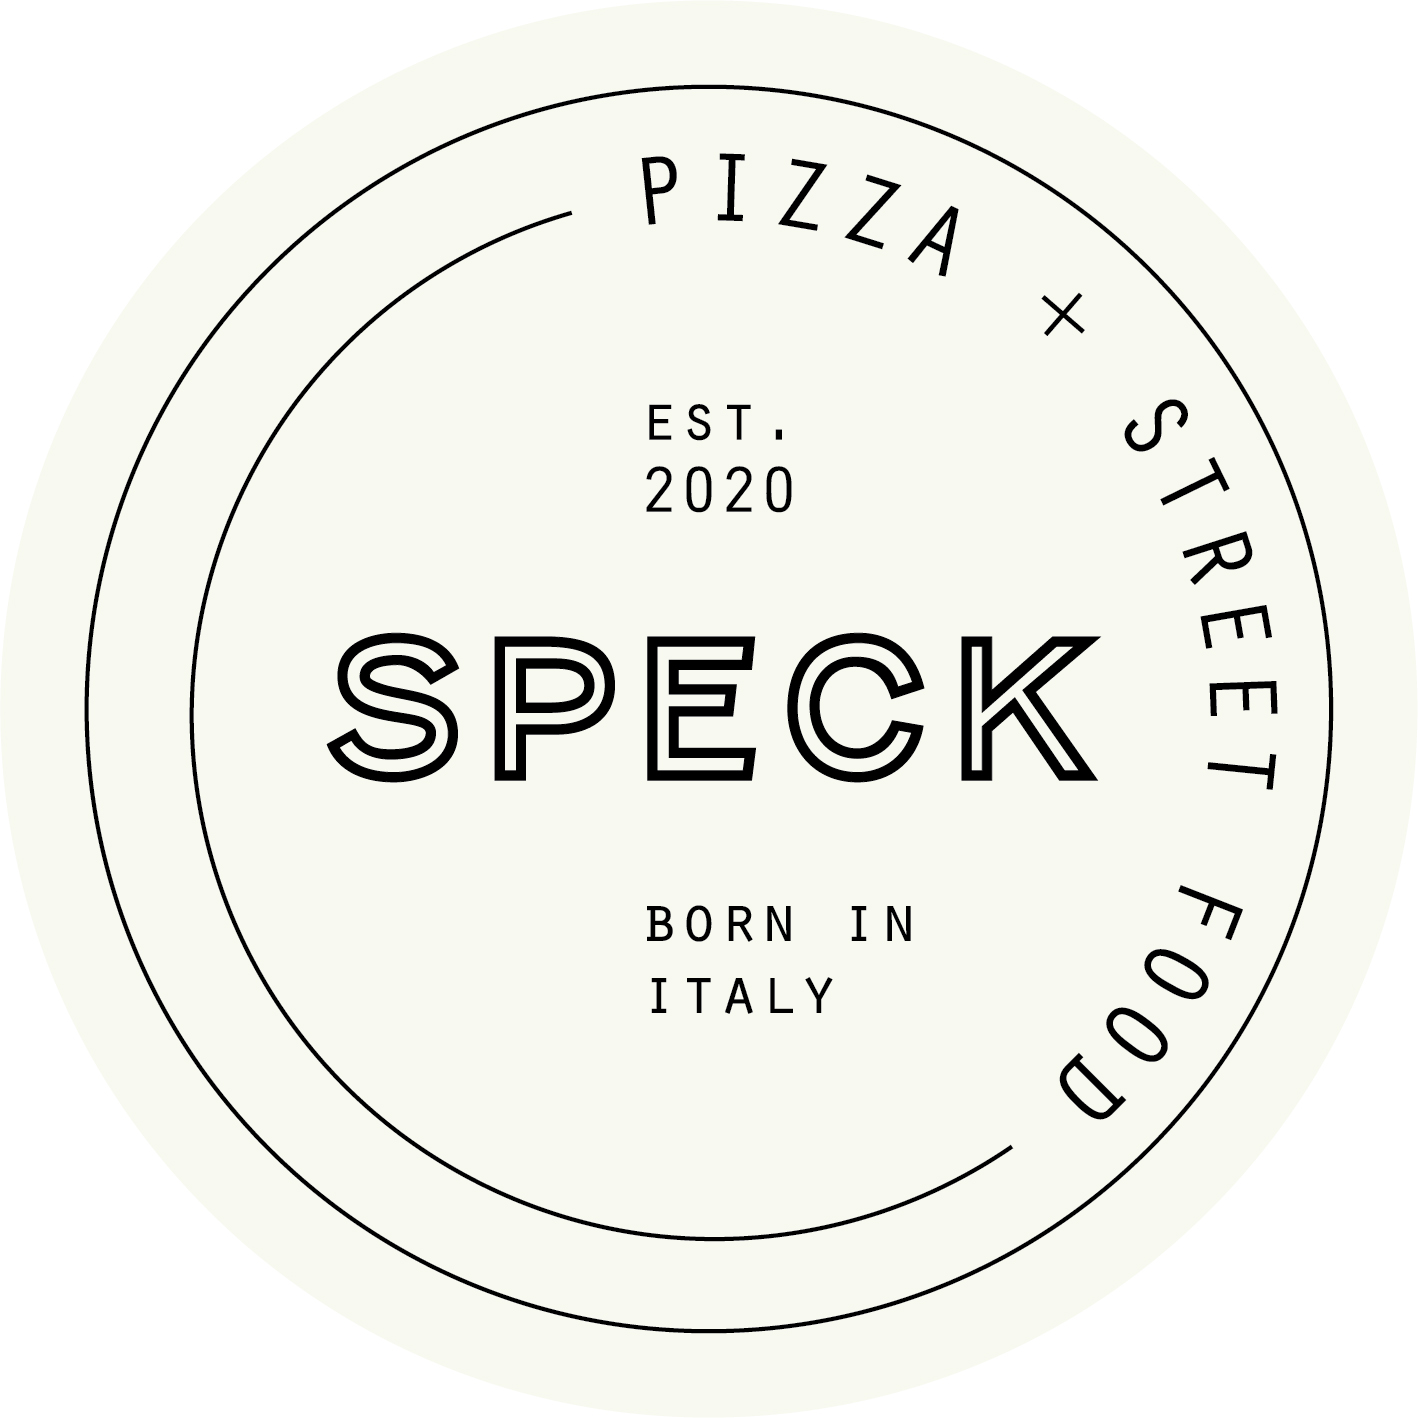 Speck Pizza